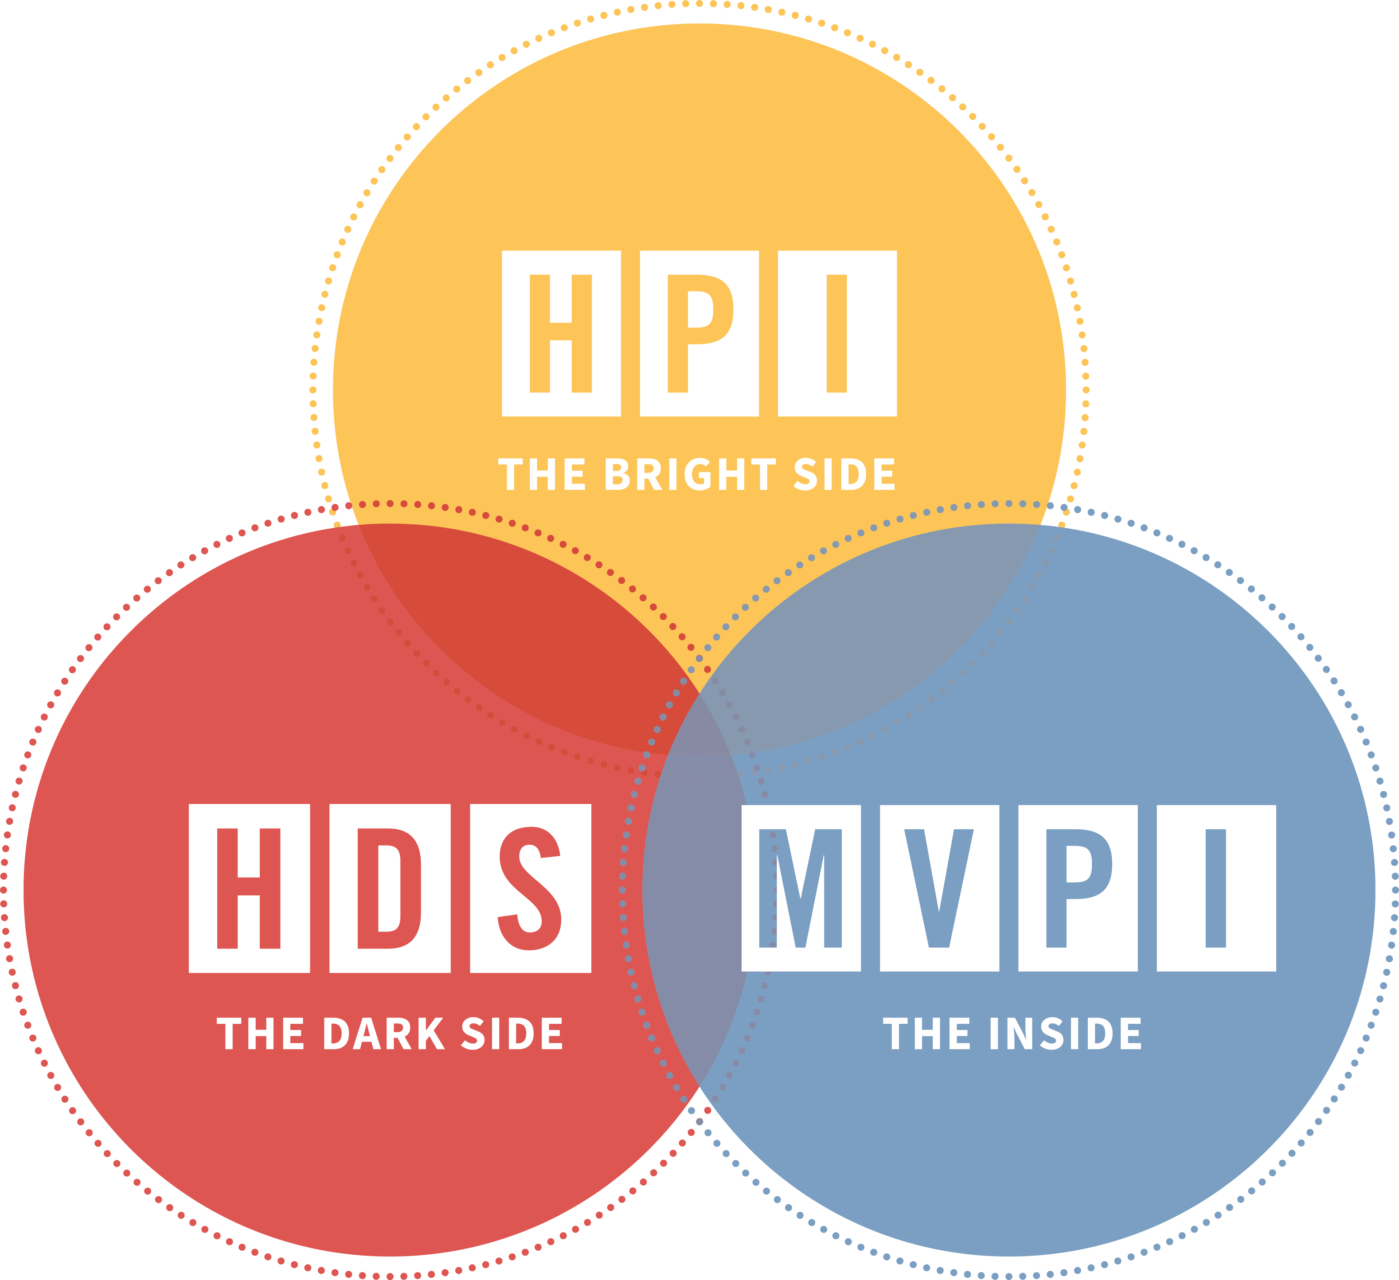 Venn Diagram of The Bright Side, Dark Side, and Inside, following the Hogan Assessment